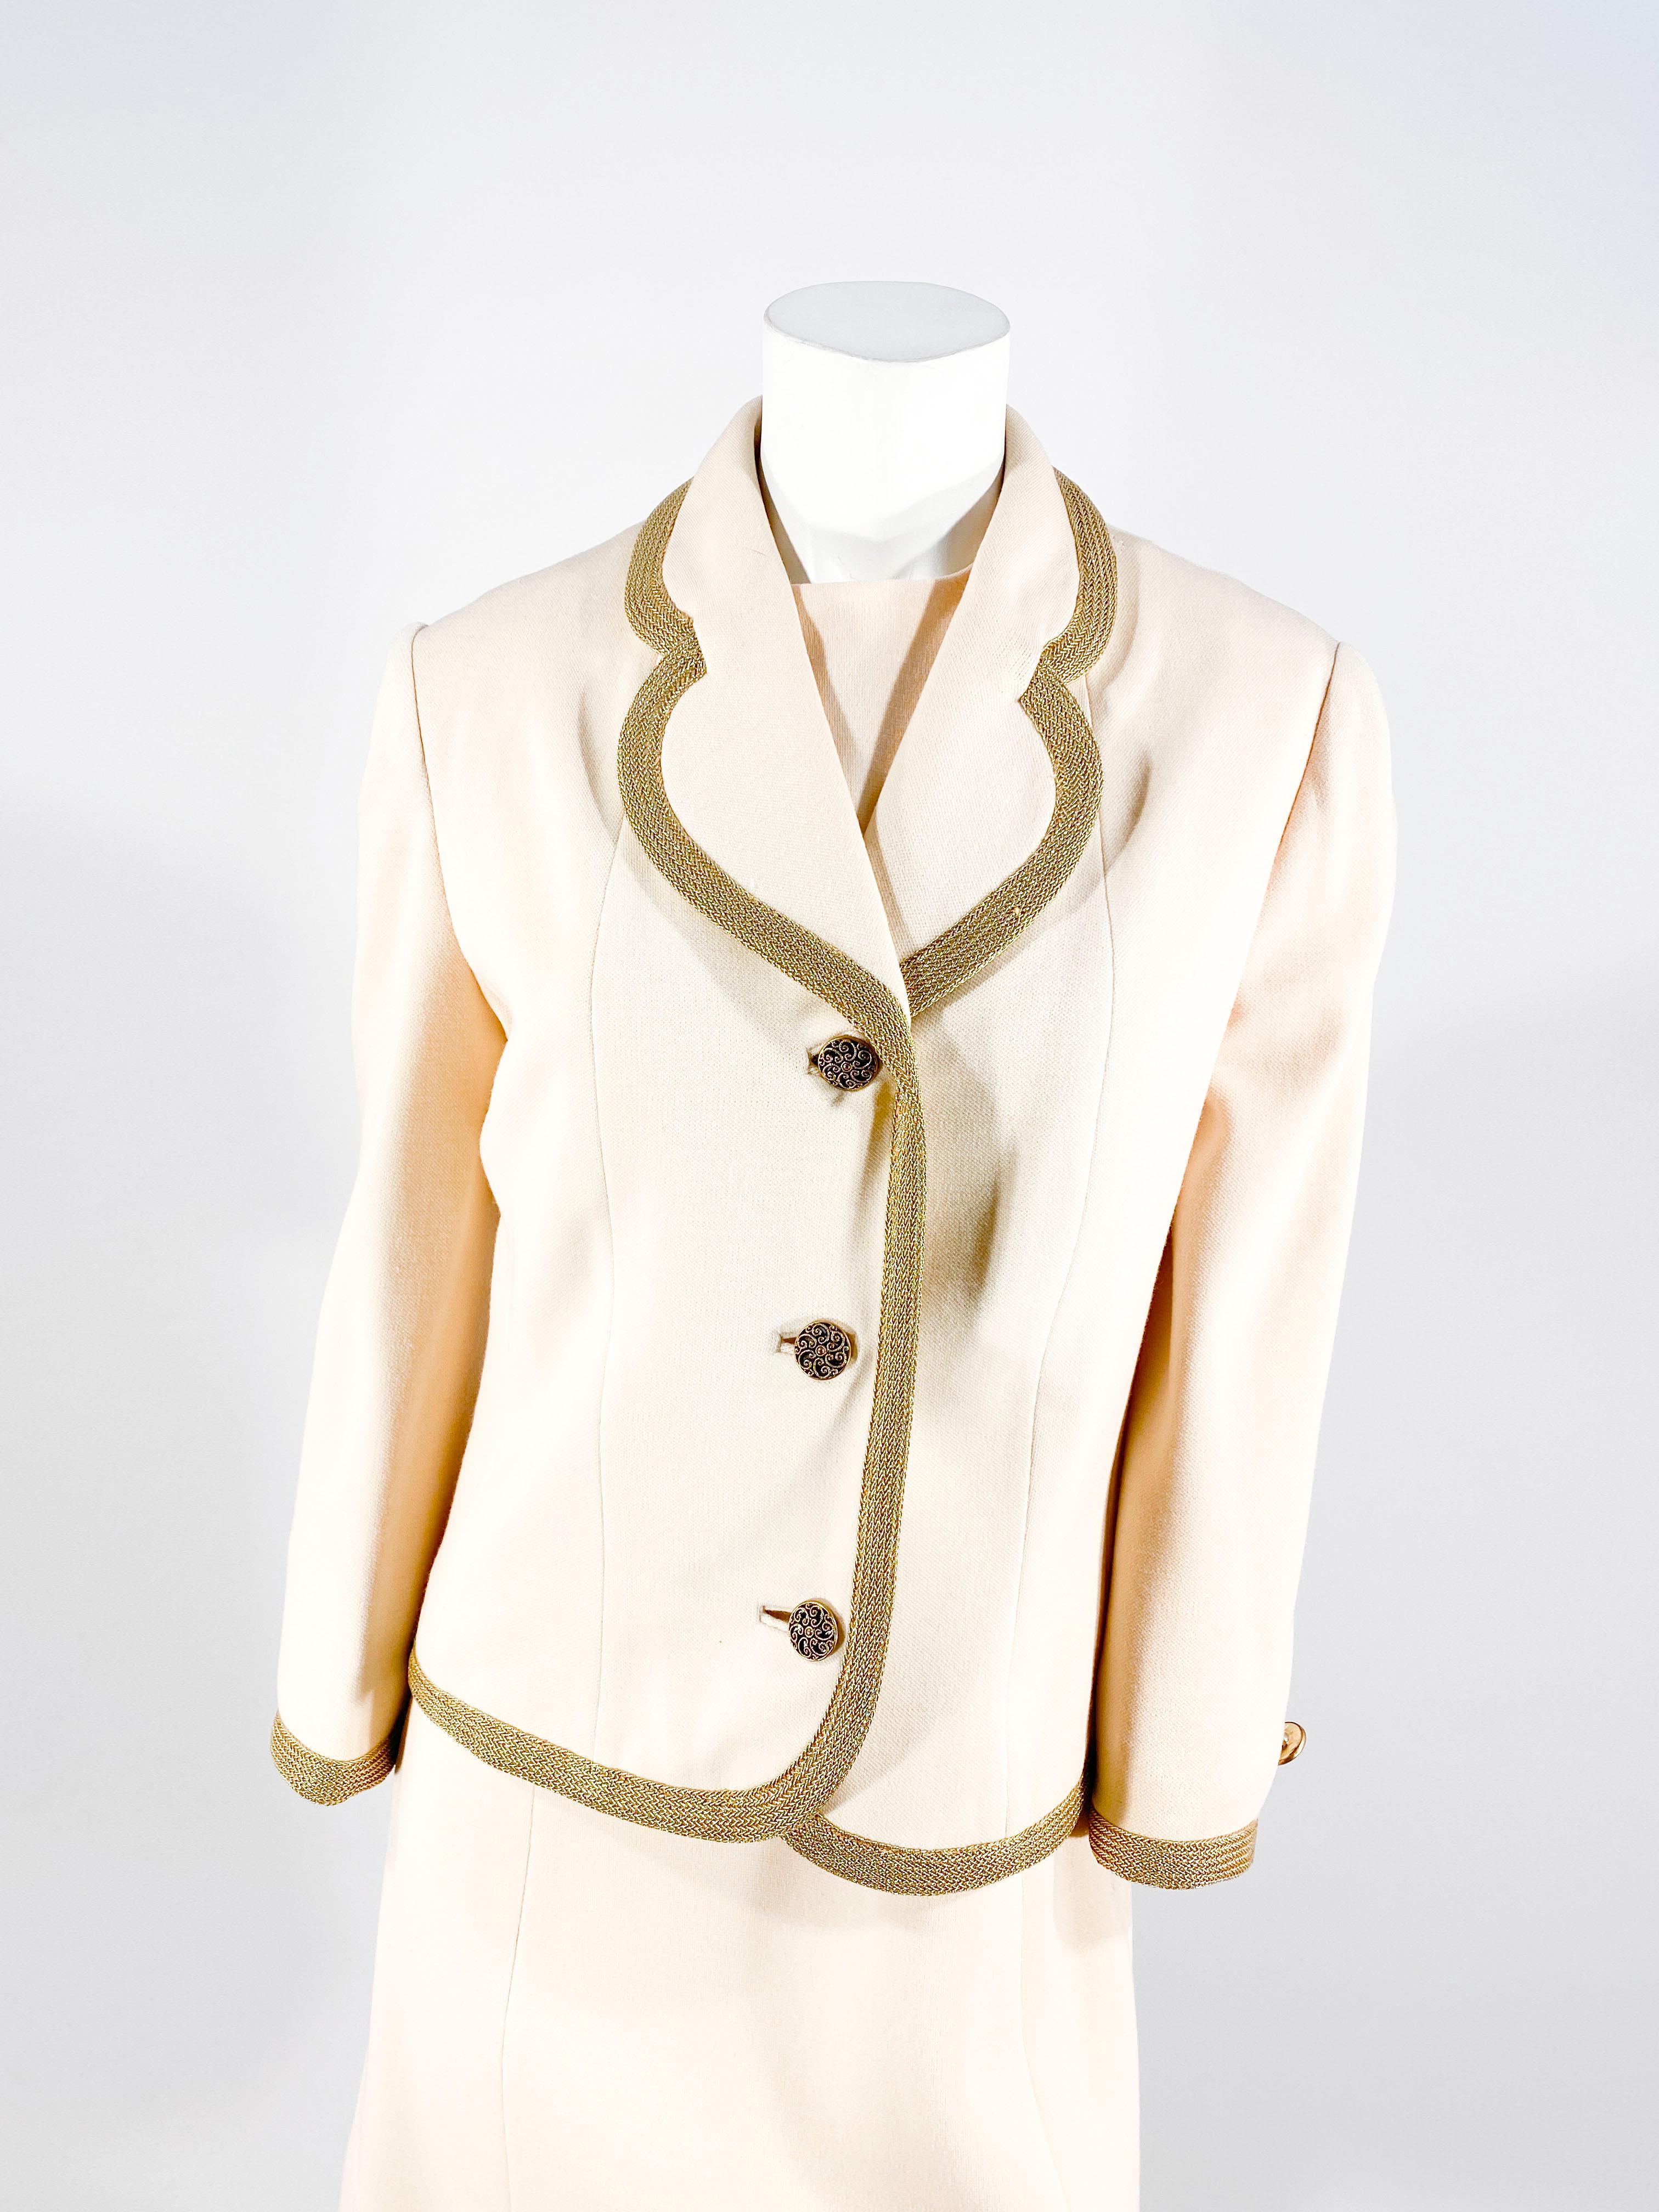 1970s Lilly Ann Ivory-colored wool knit suit with metallic brass trim along the collar and coat edges. The knee length shift dress is sleeveless and entirely lined with a back zip closure. The jacket has designer buttons along the face and the